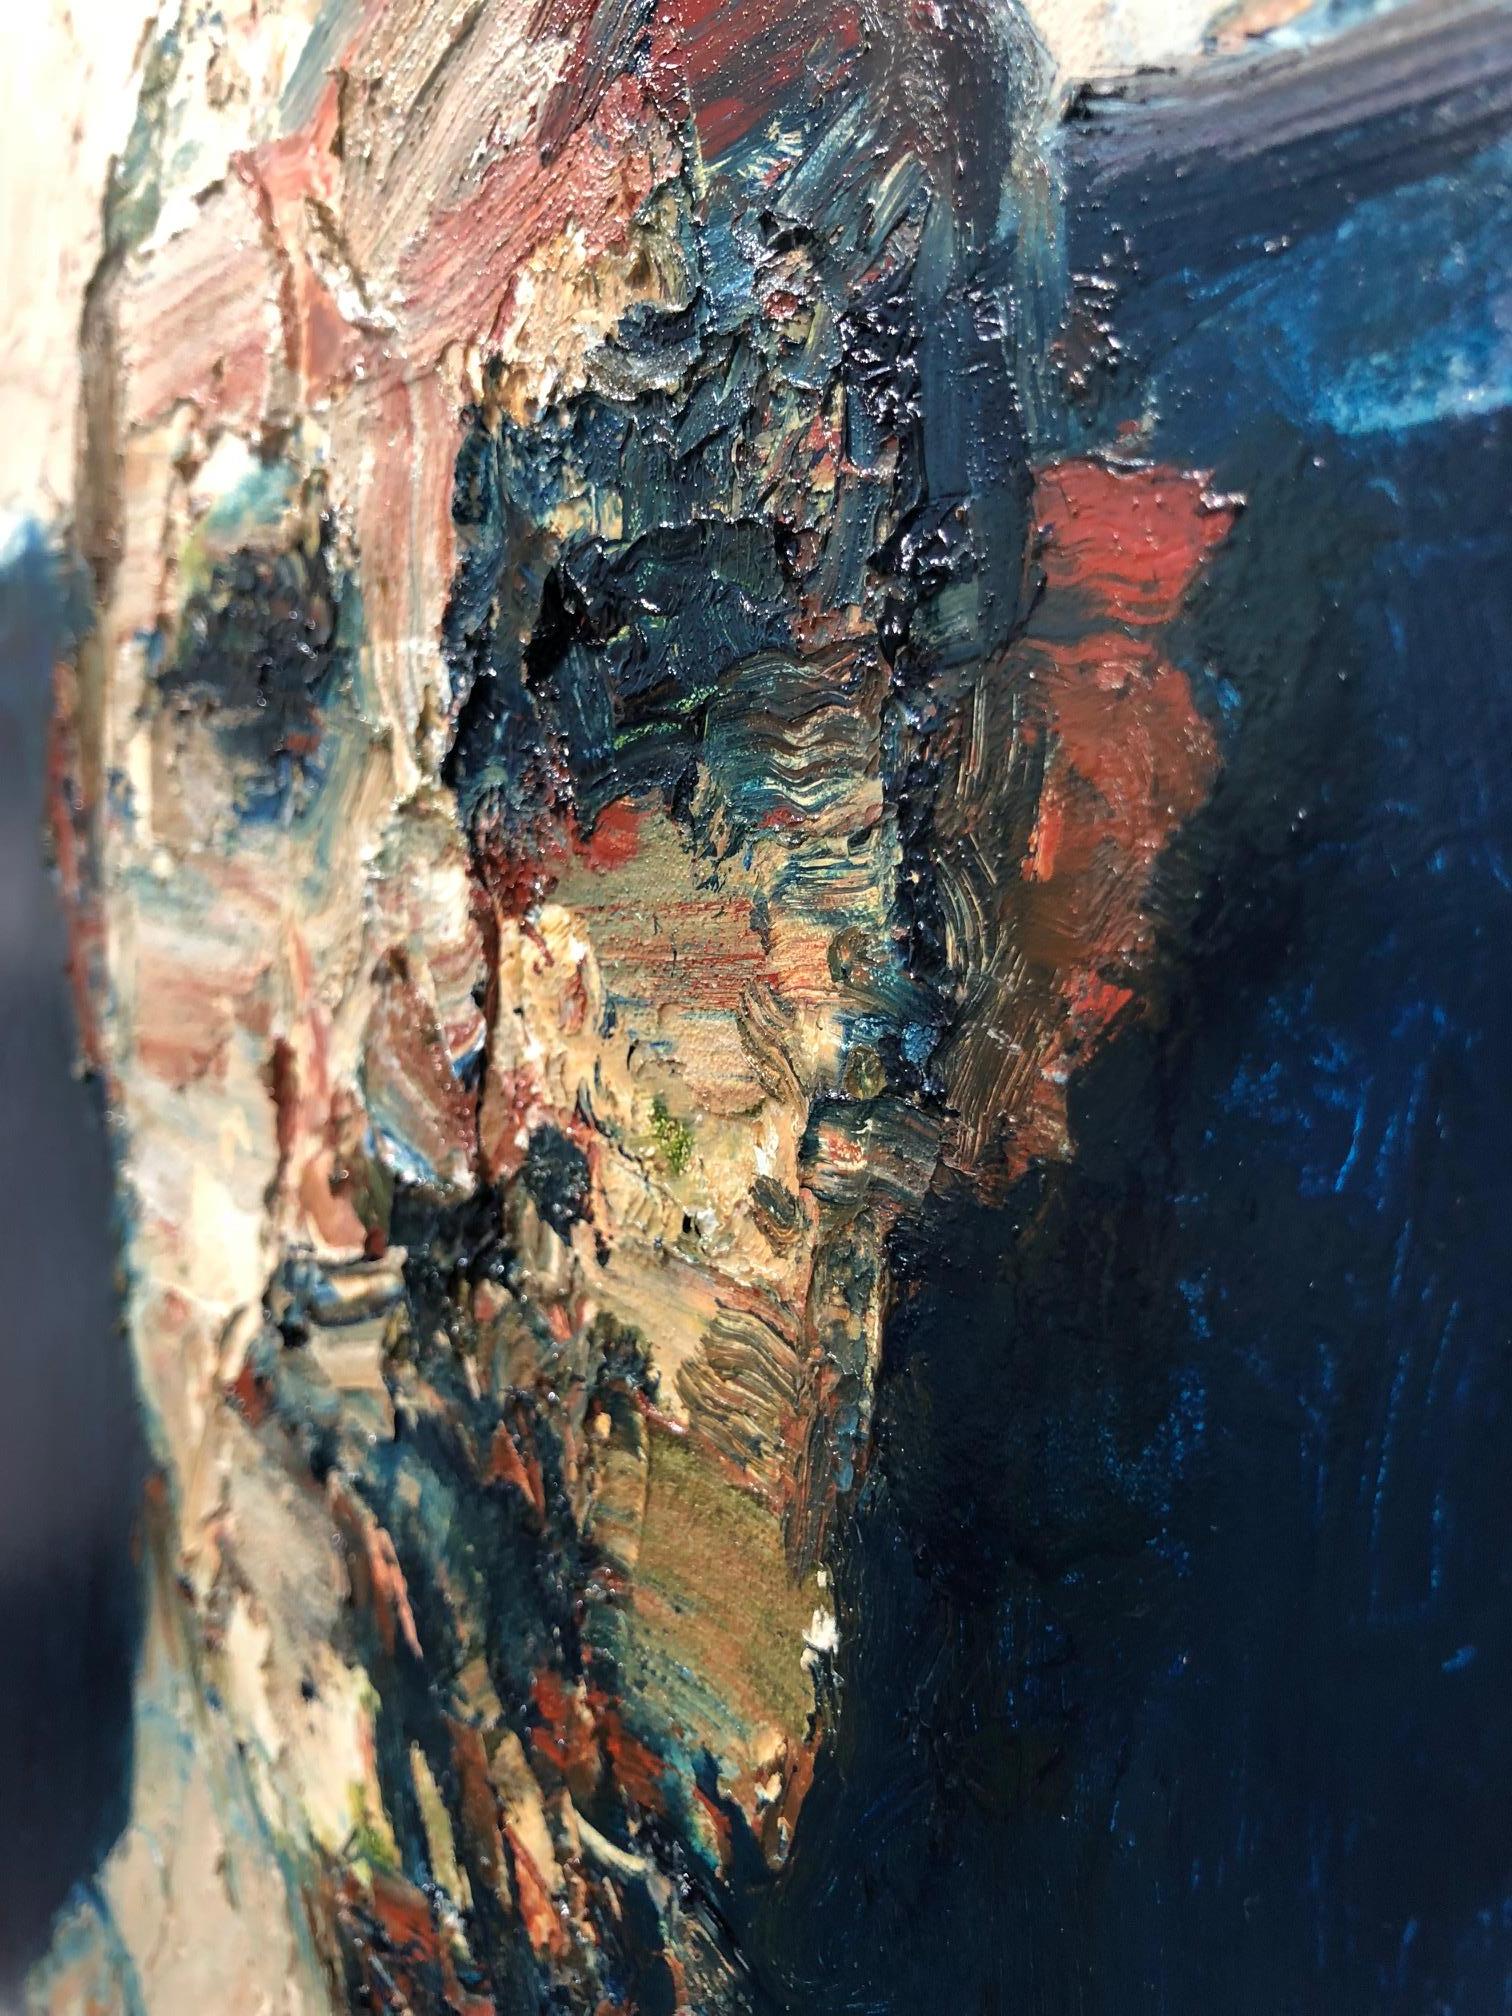 Bold in cobalt, ultramarine blue and earth colors, abstracted male head portrait painted on pale wood panel by John Goodman, whose paintings, drawings, and sculptures are a dichotomy of understated minimalism with reductive use of color that conveys